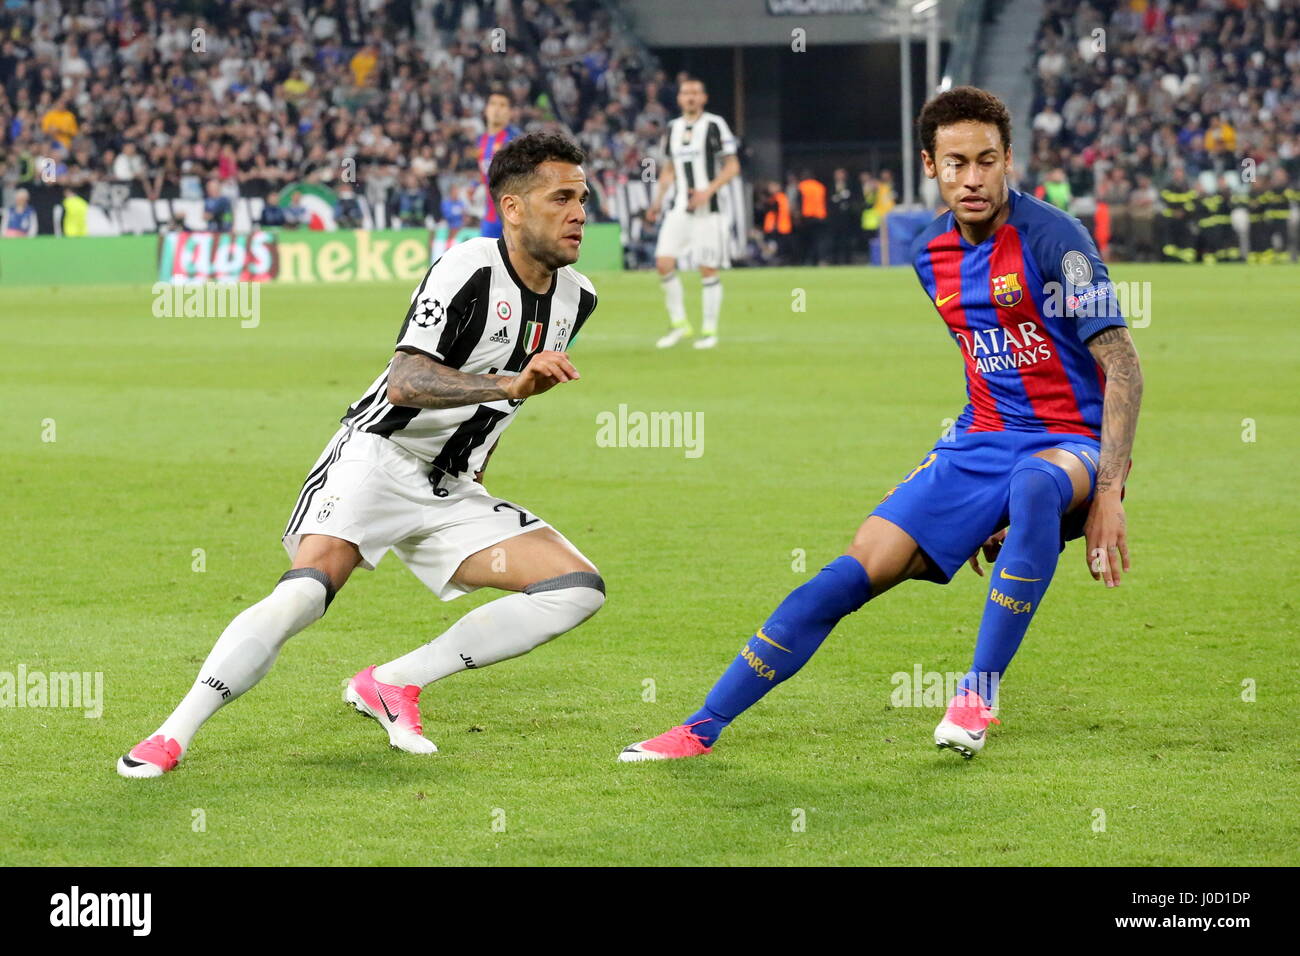 Turin, Italy. 11th Apr, 2017. Dani Alves (Juventus FC) and Neymar (FCB Barcelona) during the 1st leg of Champions League quarter-final between Juventus FC and FCB Barcelona at Juventus Stadium on April 11, 2017 in Turin, Italy. Juventus won 3-0 over Barcelona. Credit: Massimiliano Ferraro/Alamy Live News Stock Photo